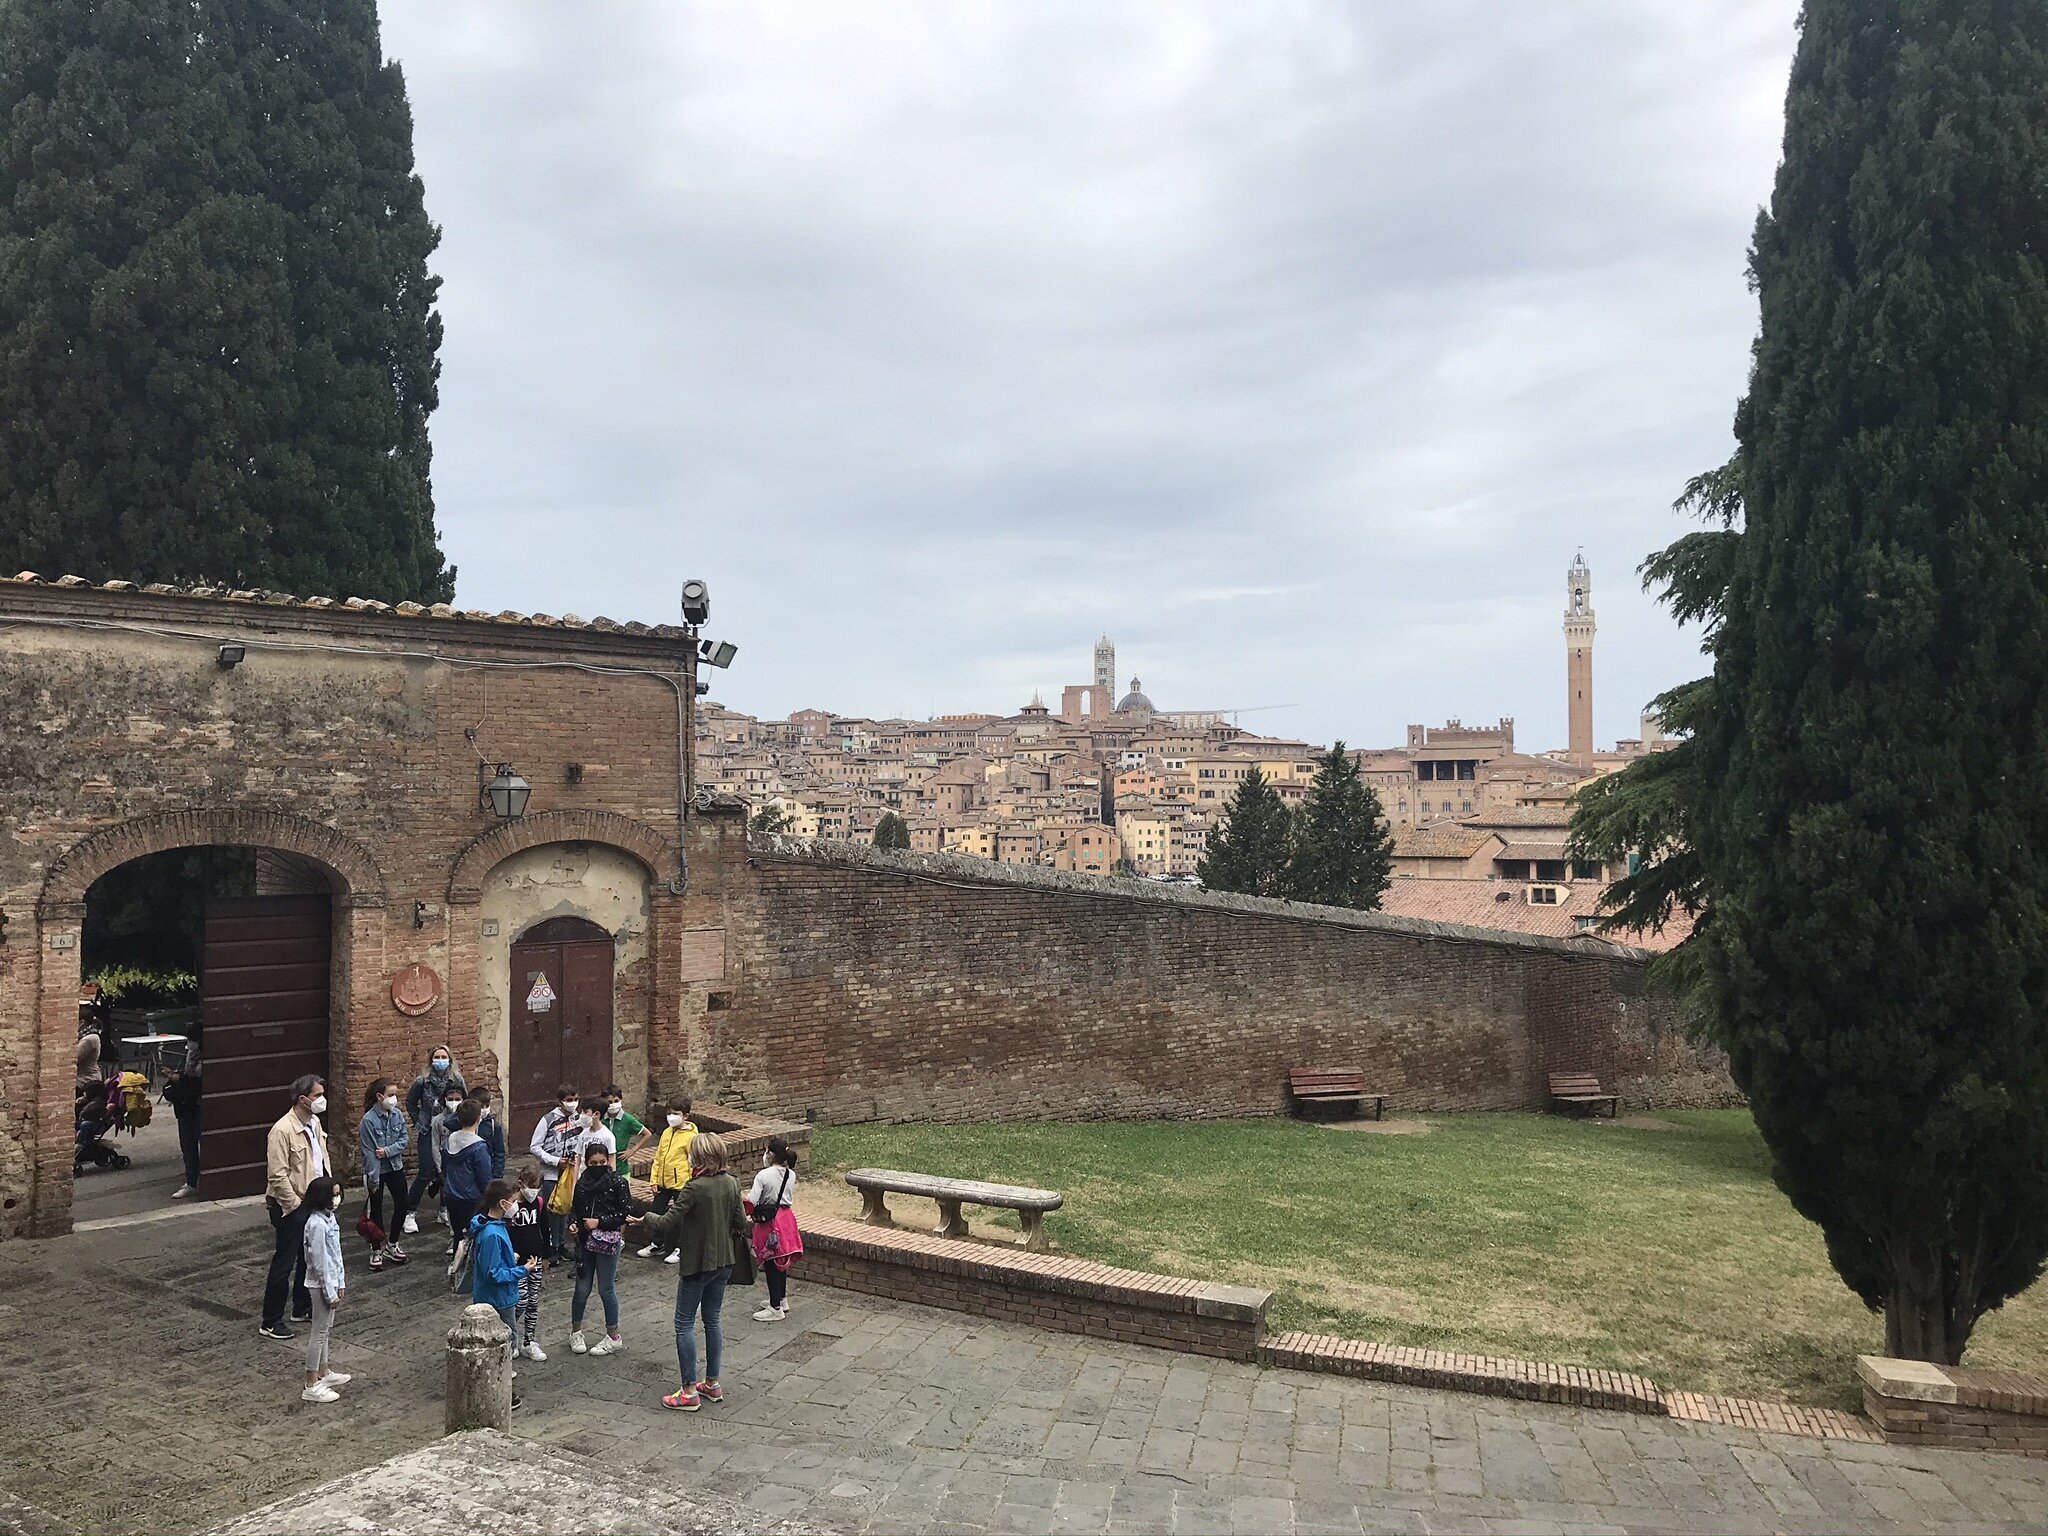 SIENA, Italy. June 4th, 2021. PICTURED: Schoolchildren on a fieldtrip in front of the offices of the Contrada del Valdimontone, or Valley of the Ram, with Siena’s Duomo, Torre di Mangia, and Piazza del Campo all visible in the background.